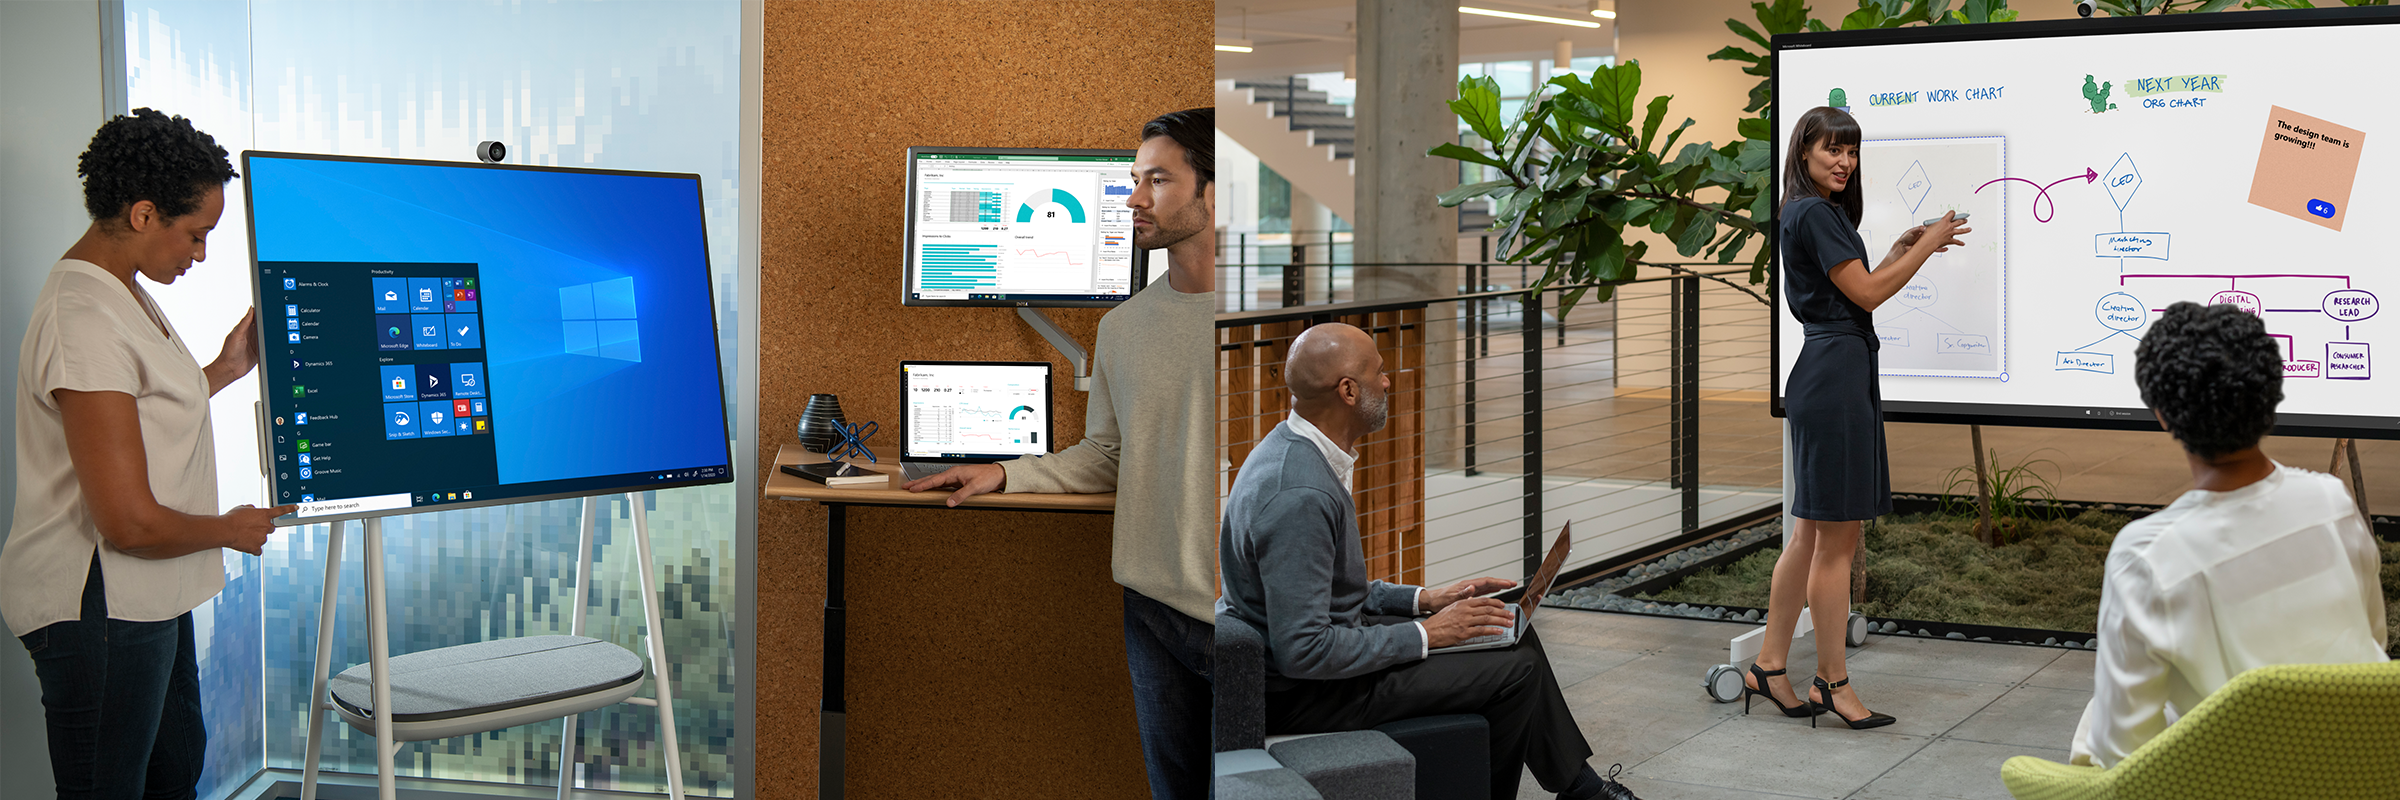 Two images show the Surface Hub in use in office spaces.